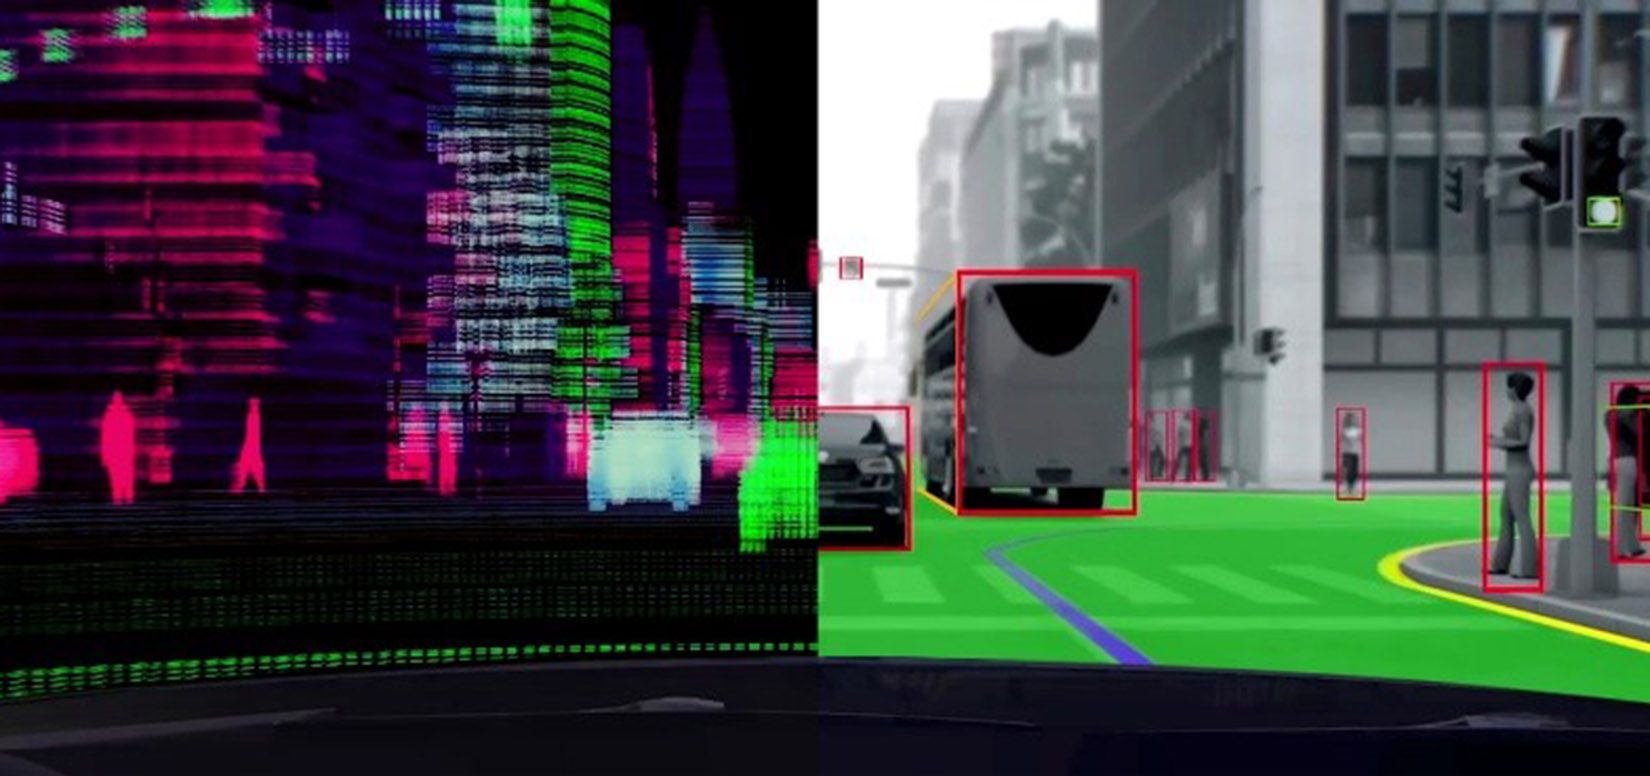 Through our True Redundancy™ approach to sensing, Mobileye utilizes a variety of sensors to enable autonomous driving.